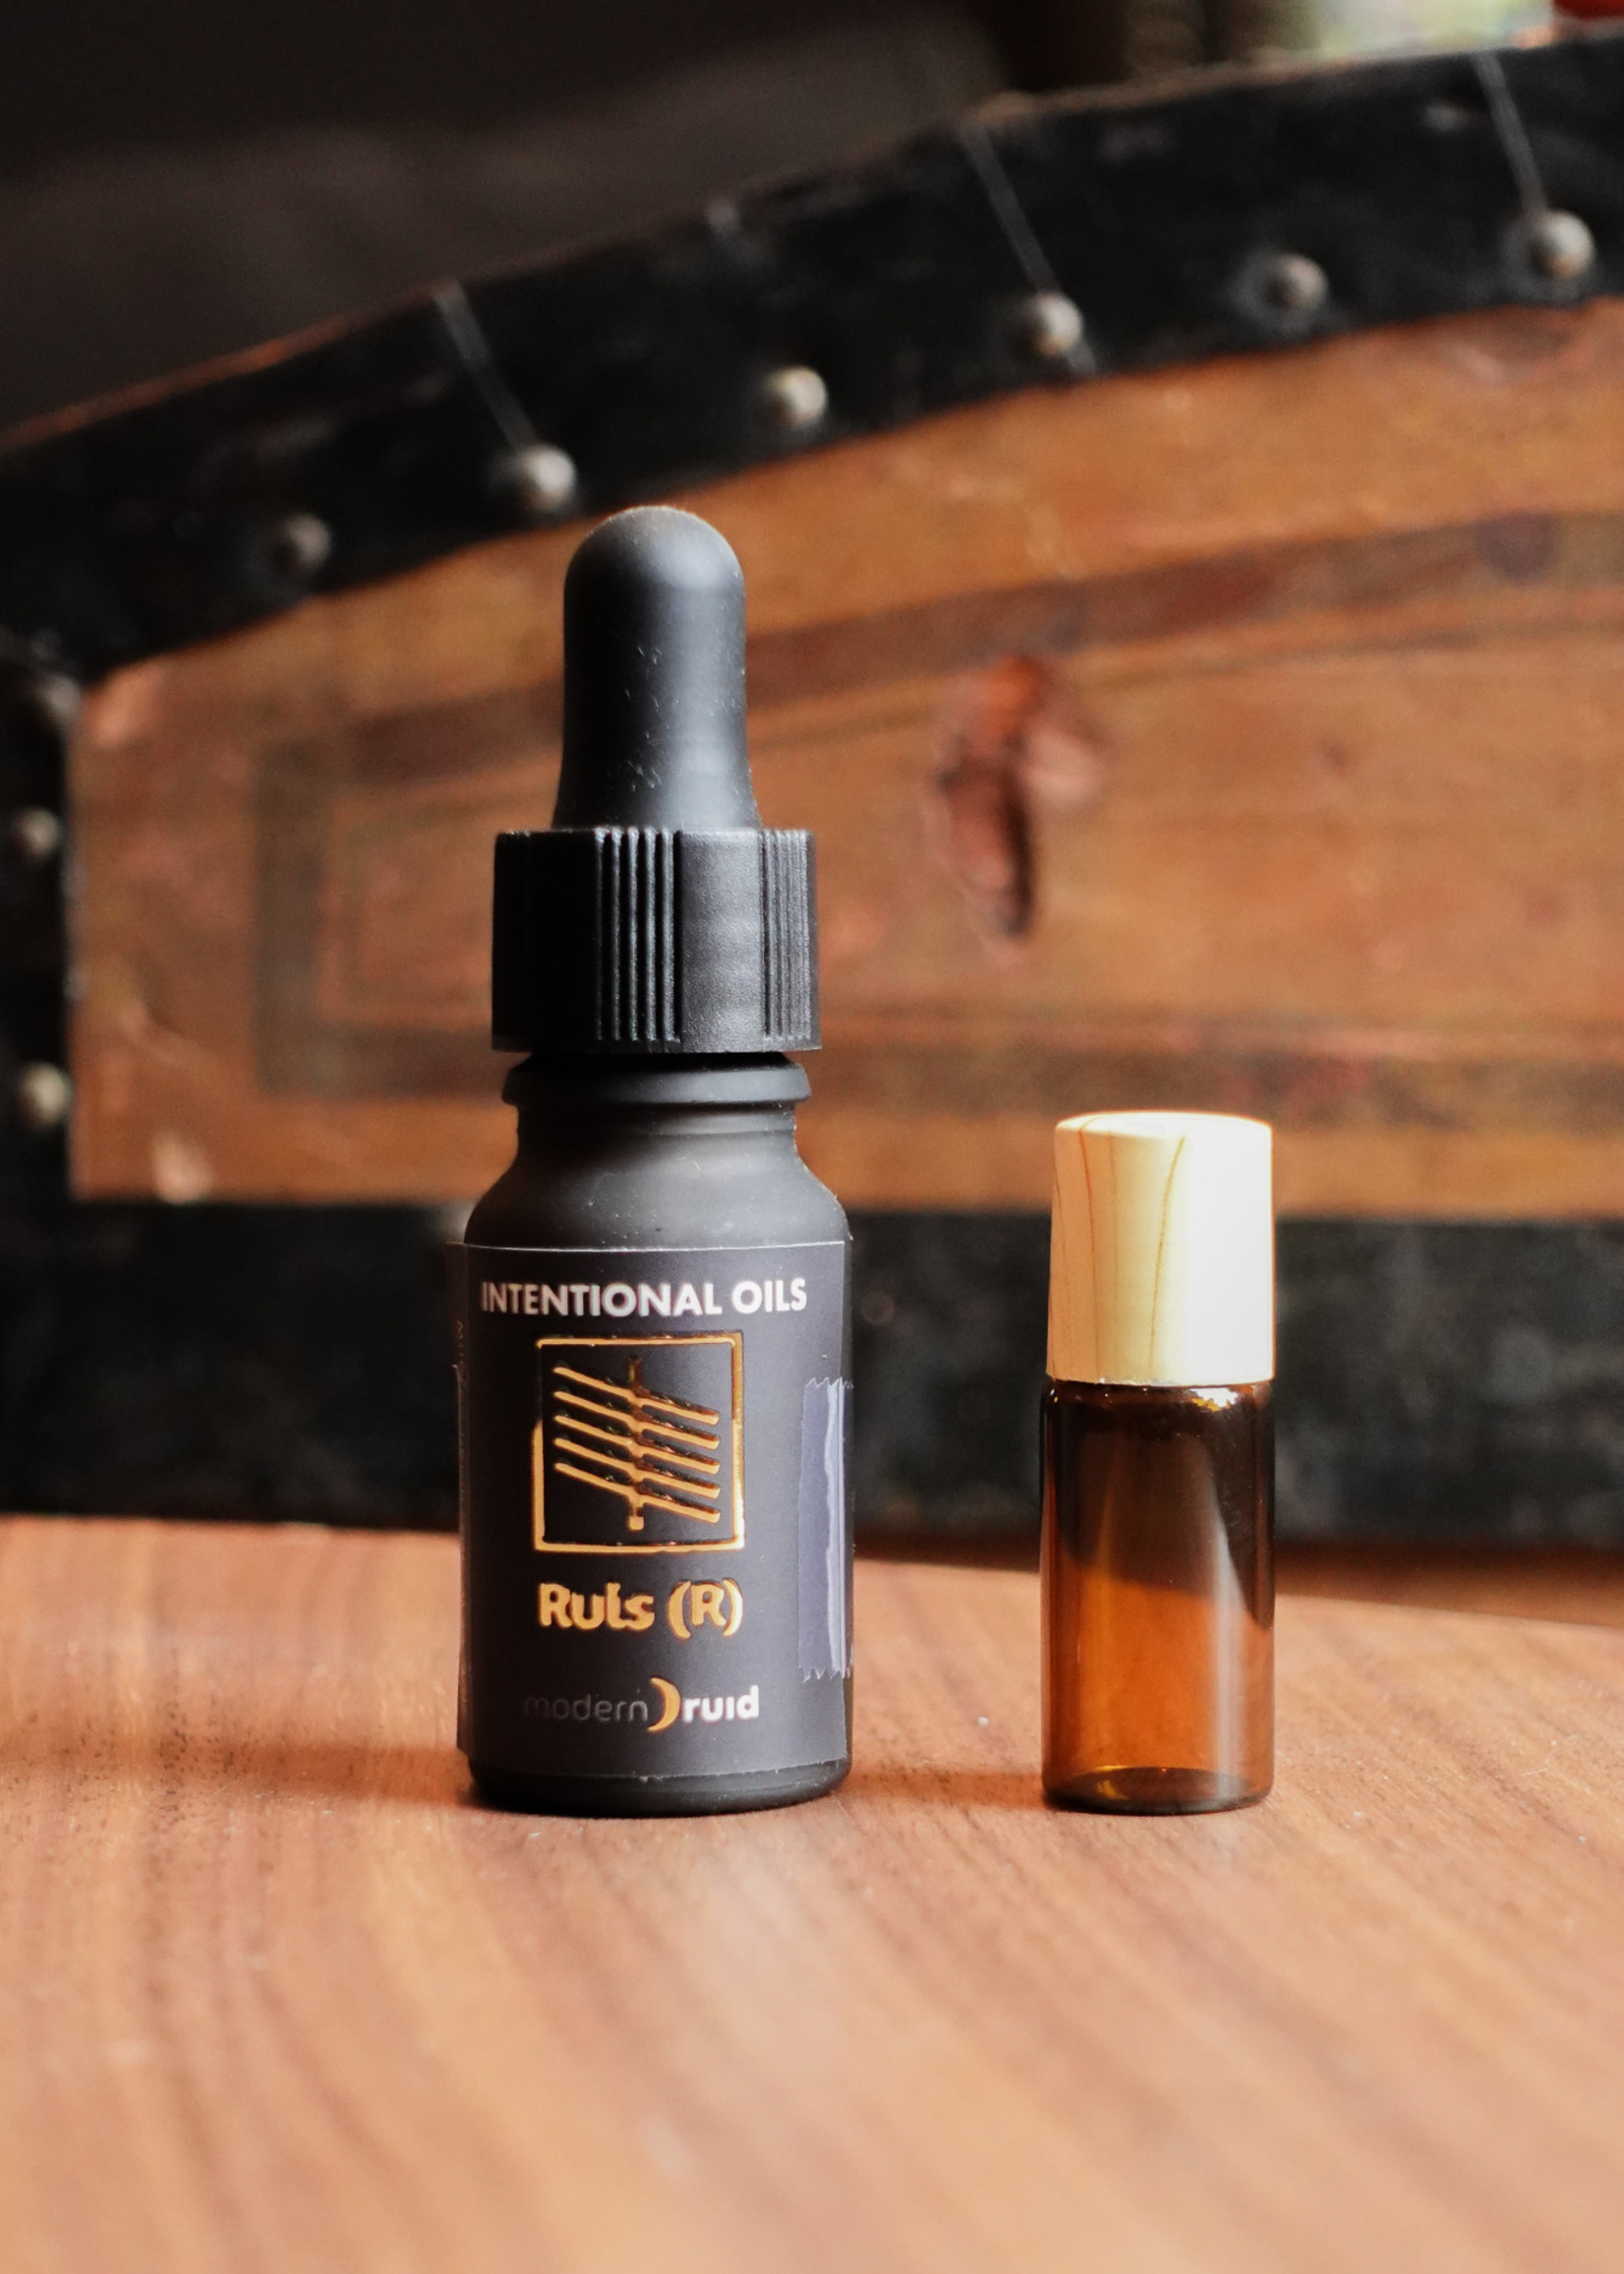 Modern Druid Ogham Oil: Ruis (R) - Passion and Sexuality